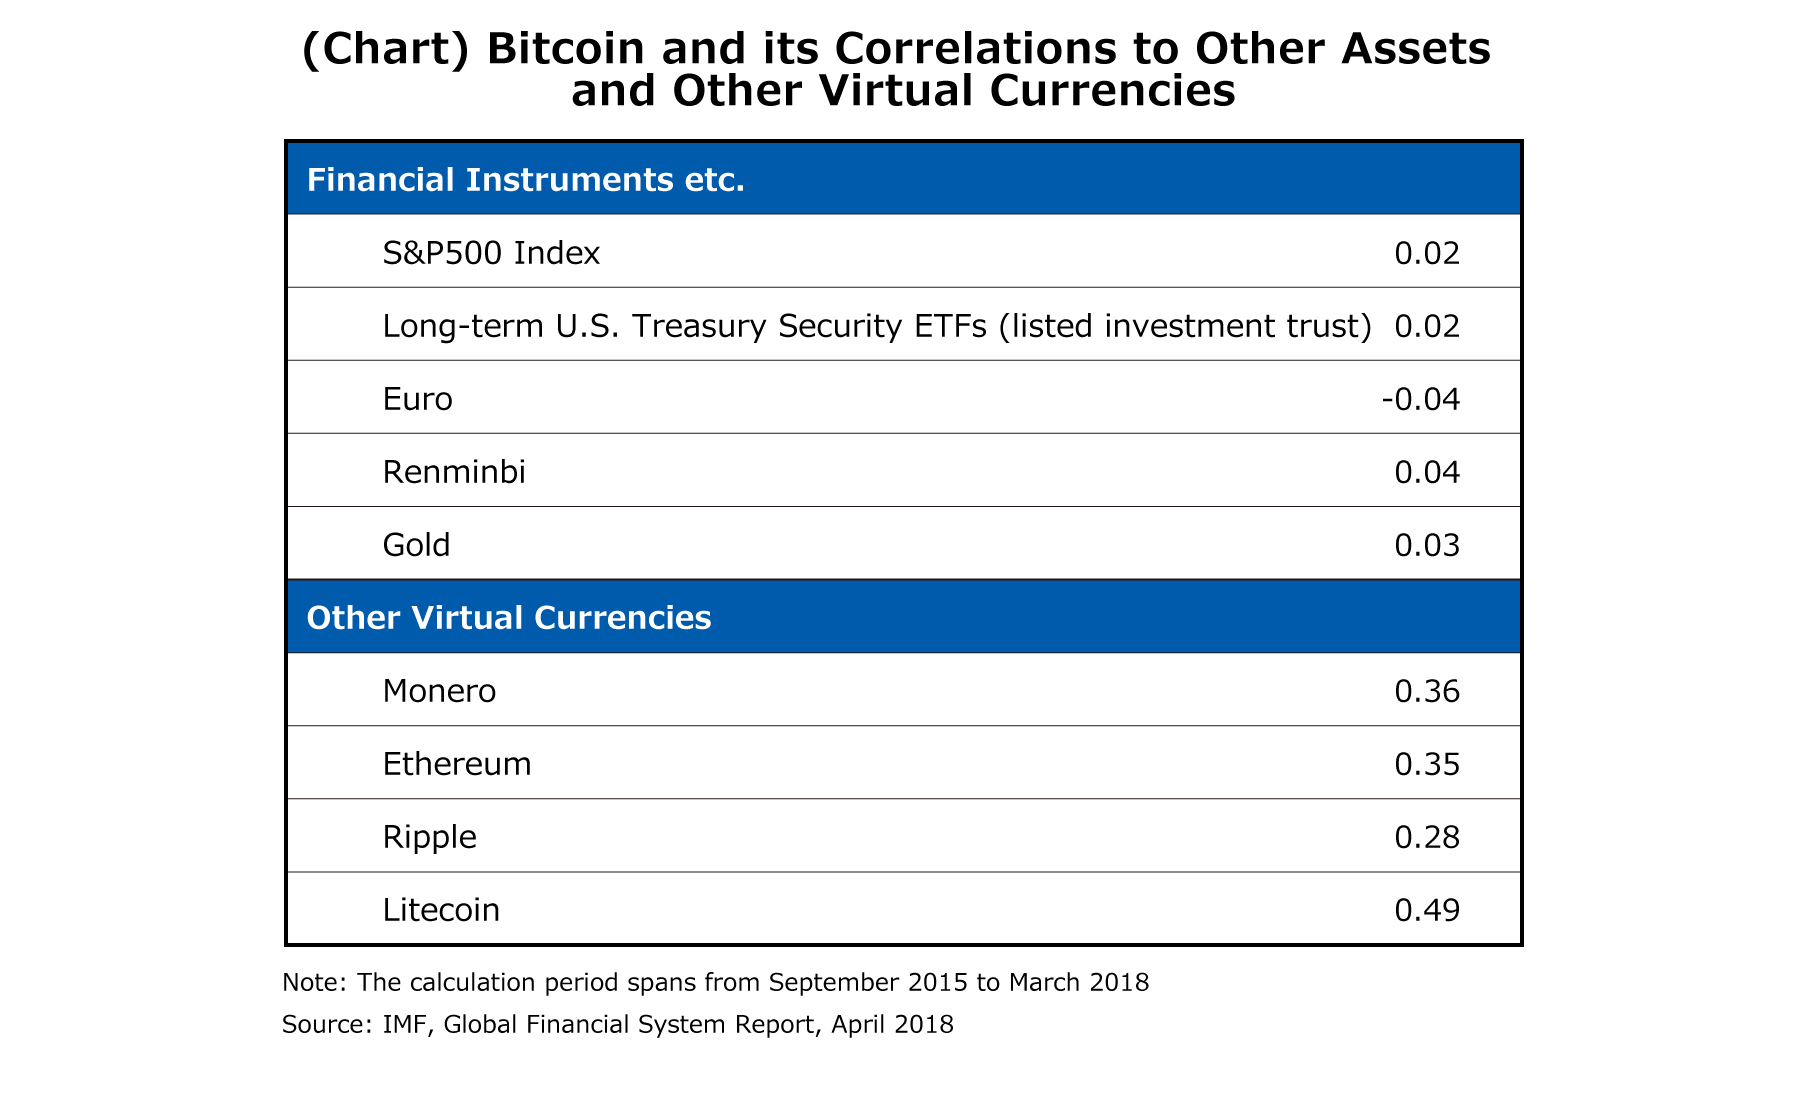 (Chart) Bitcoin and its Correlations to Other Assets and Other Virtual Currencies